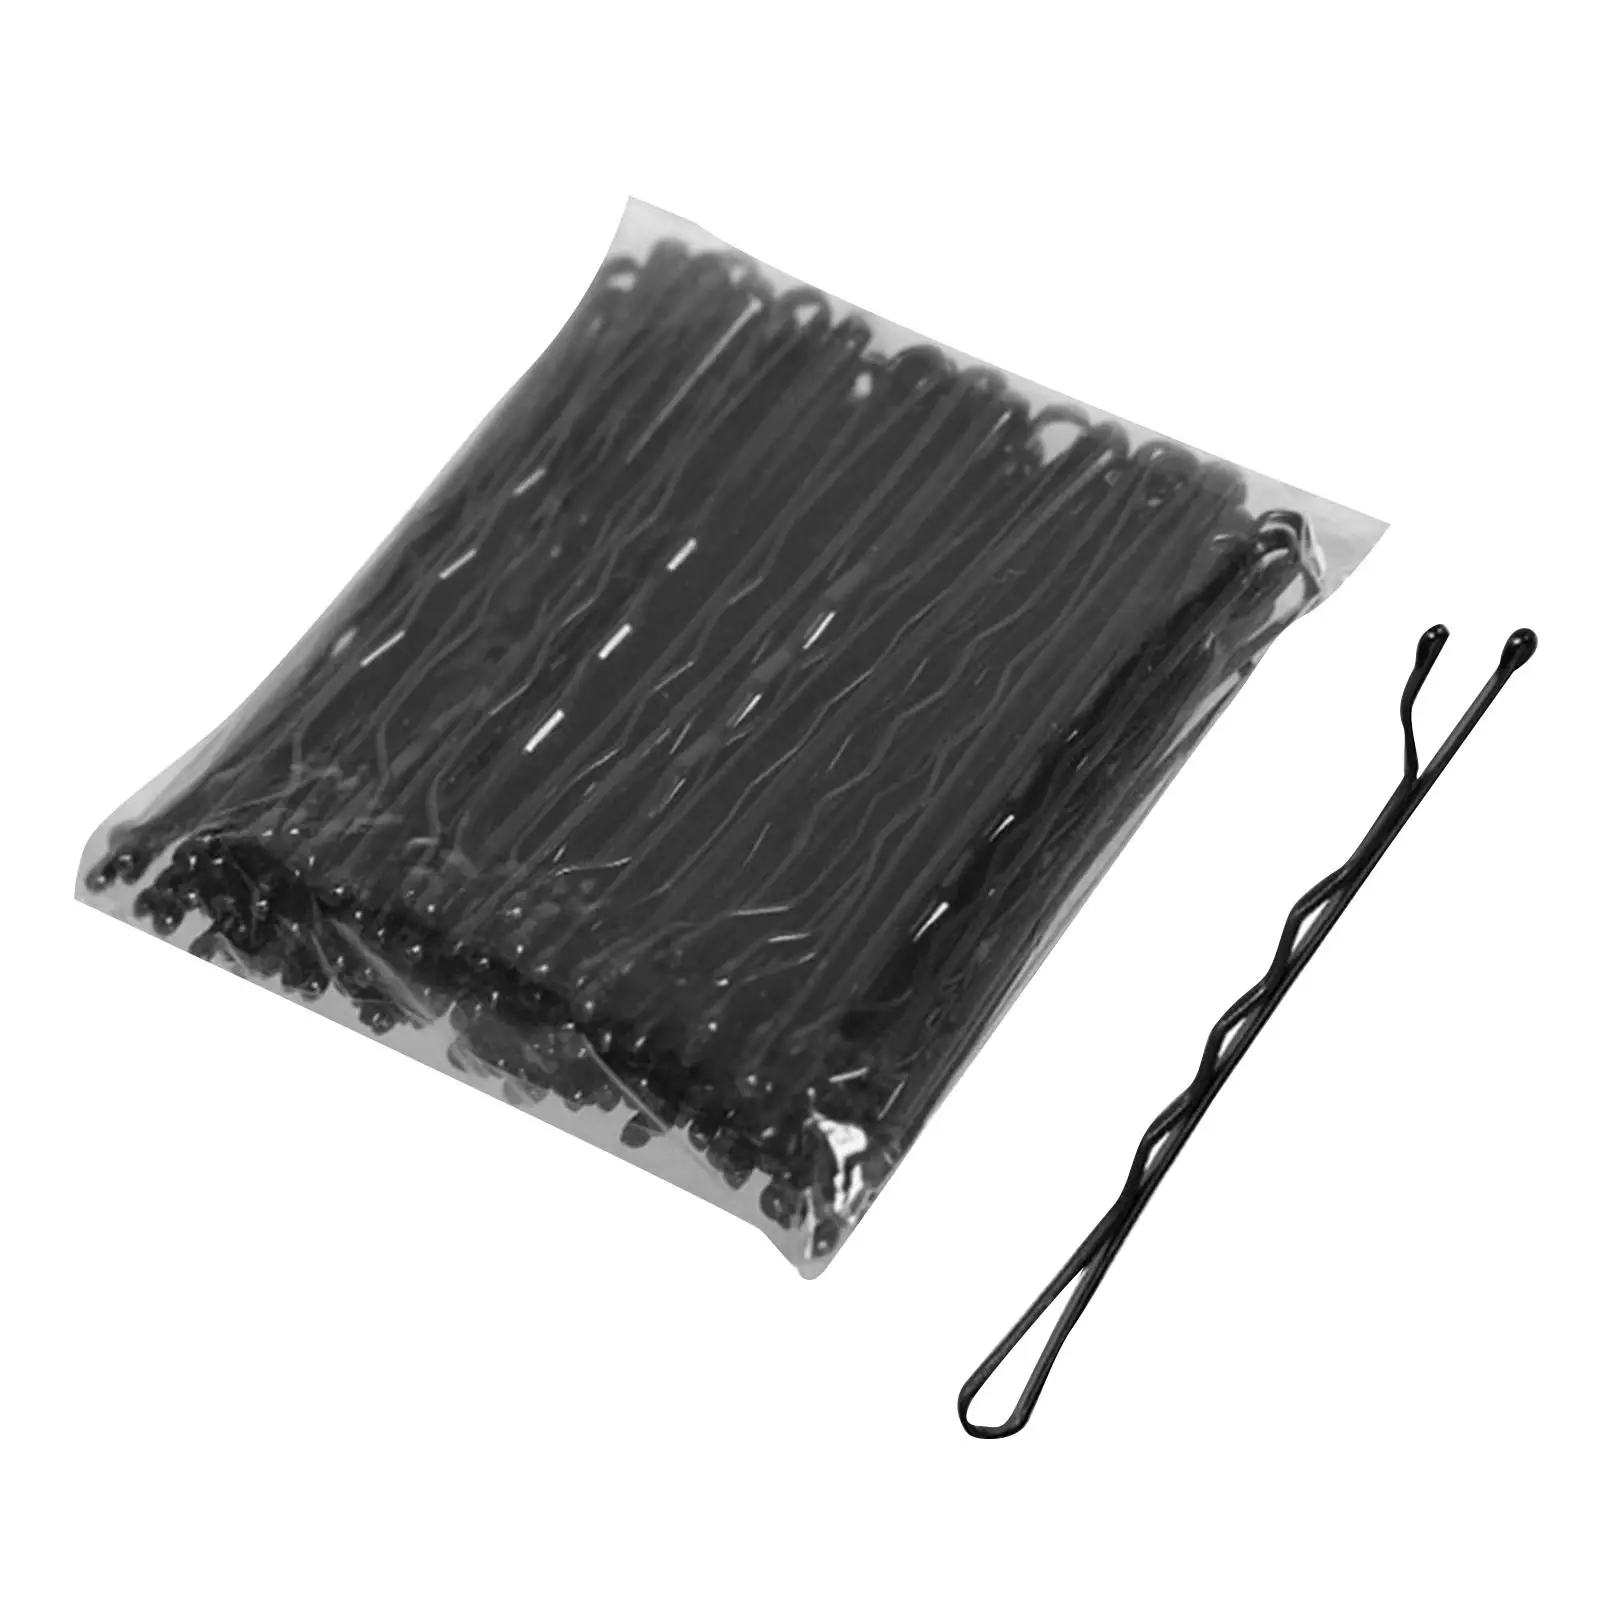 100Pcs Hair Pin Keep Hairs in Place Fit All Hair Types Slideproof Bun Hair Pin for Hairstyling Hairdressing Salon Girls Lady